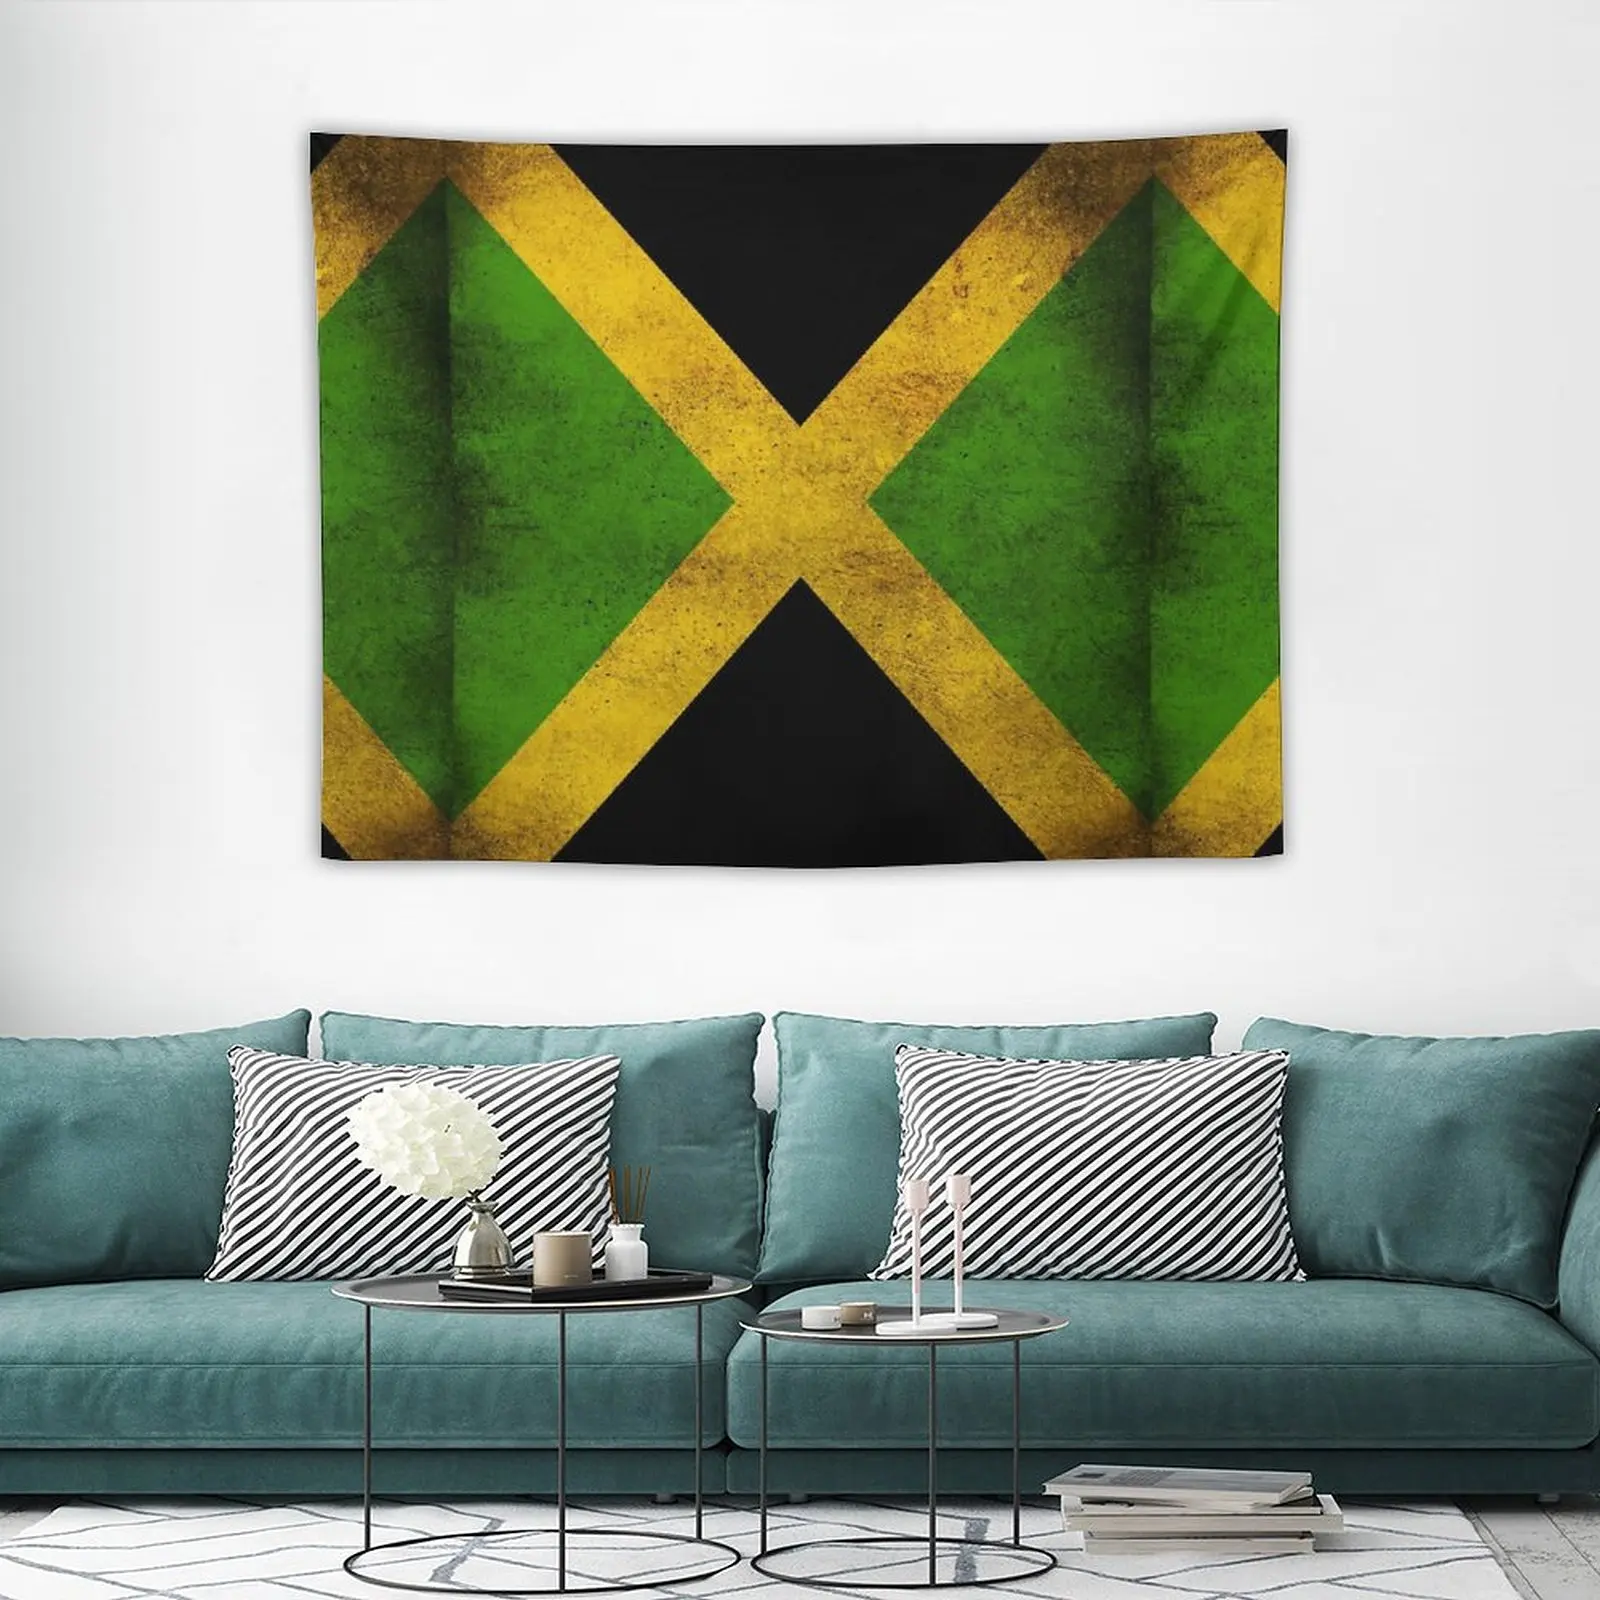 

JAMAICA Tapestry Aesthetic Room Decor Nightmare before Christmas Goth Room Decor Garden Wall Hanging